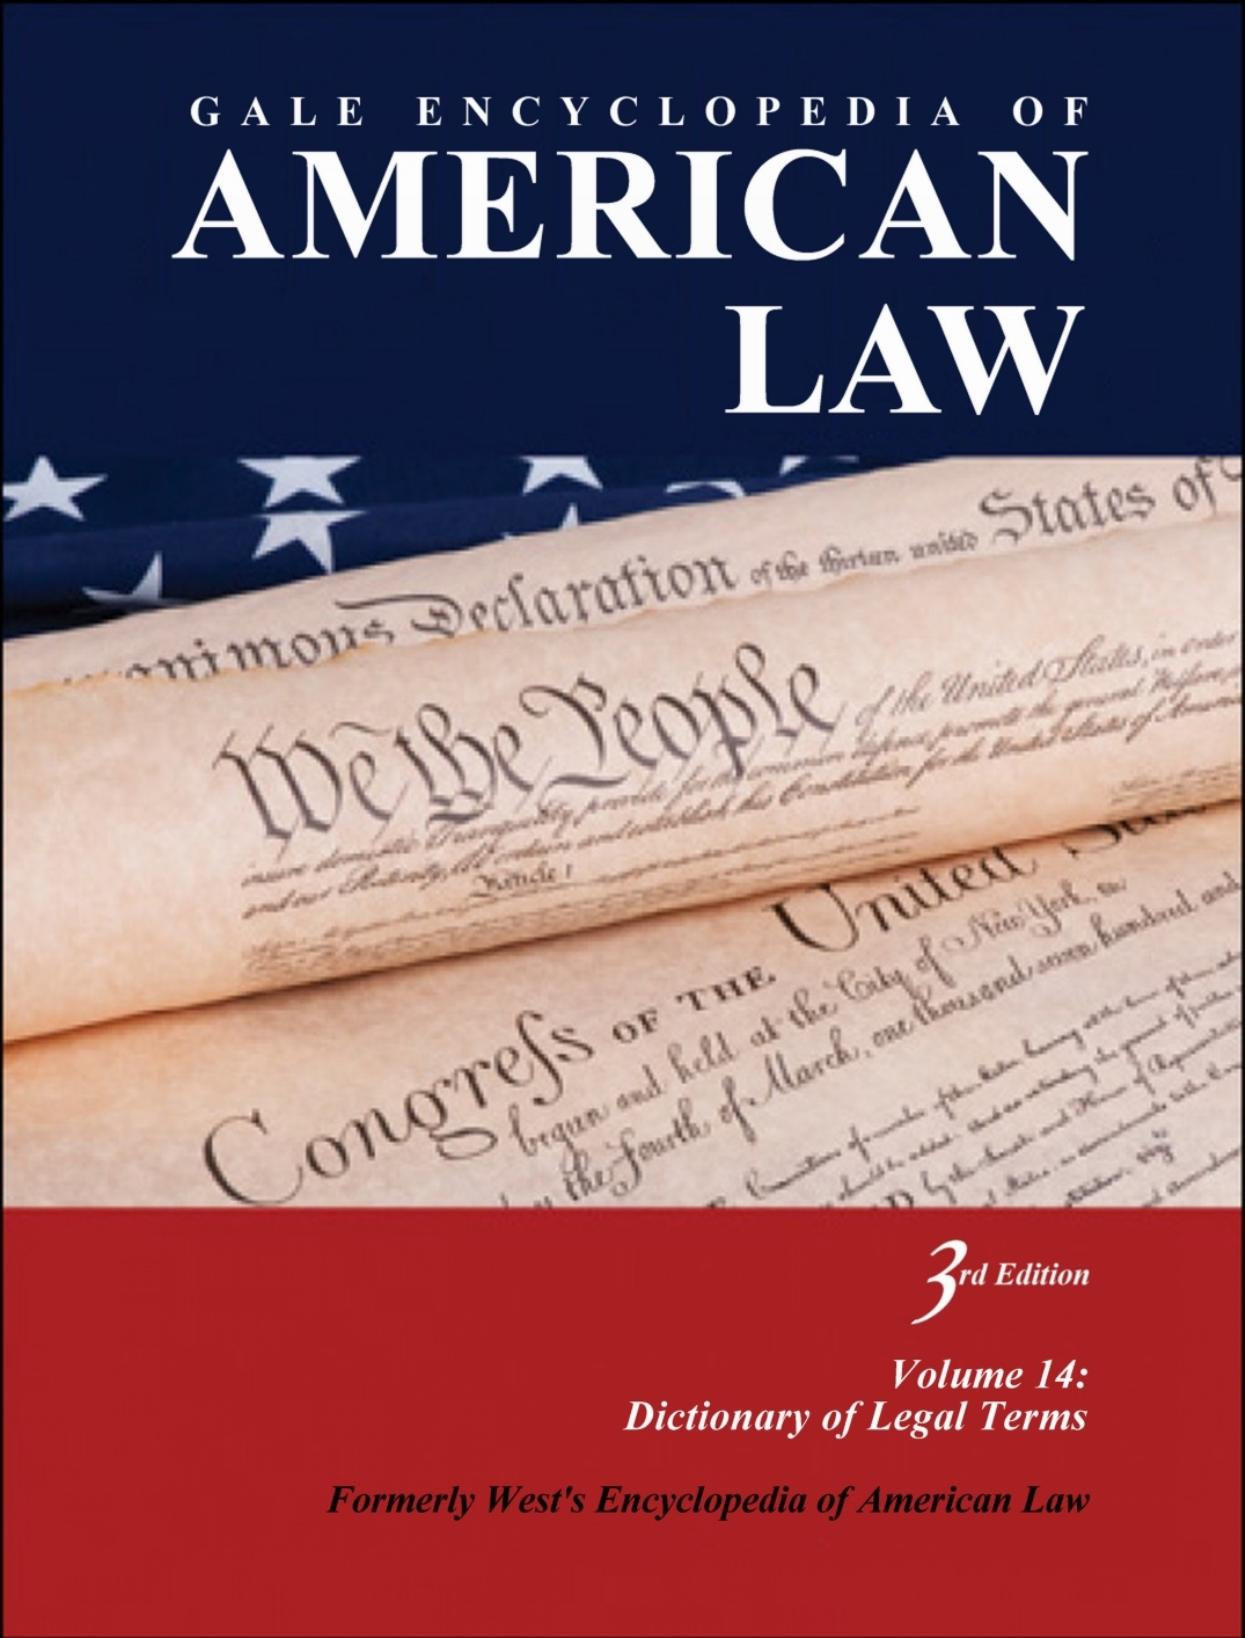 Gale Encyclopedia of American Law, 3rd Edition, Volume 14: Dictionary of Legal Terms